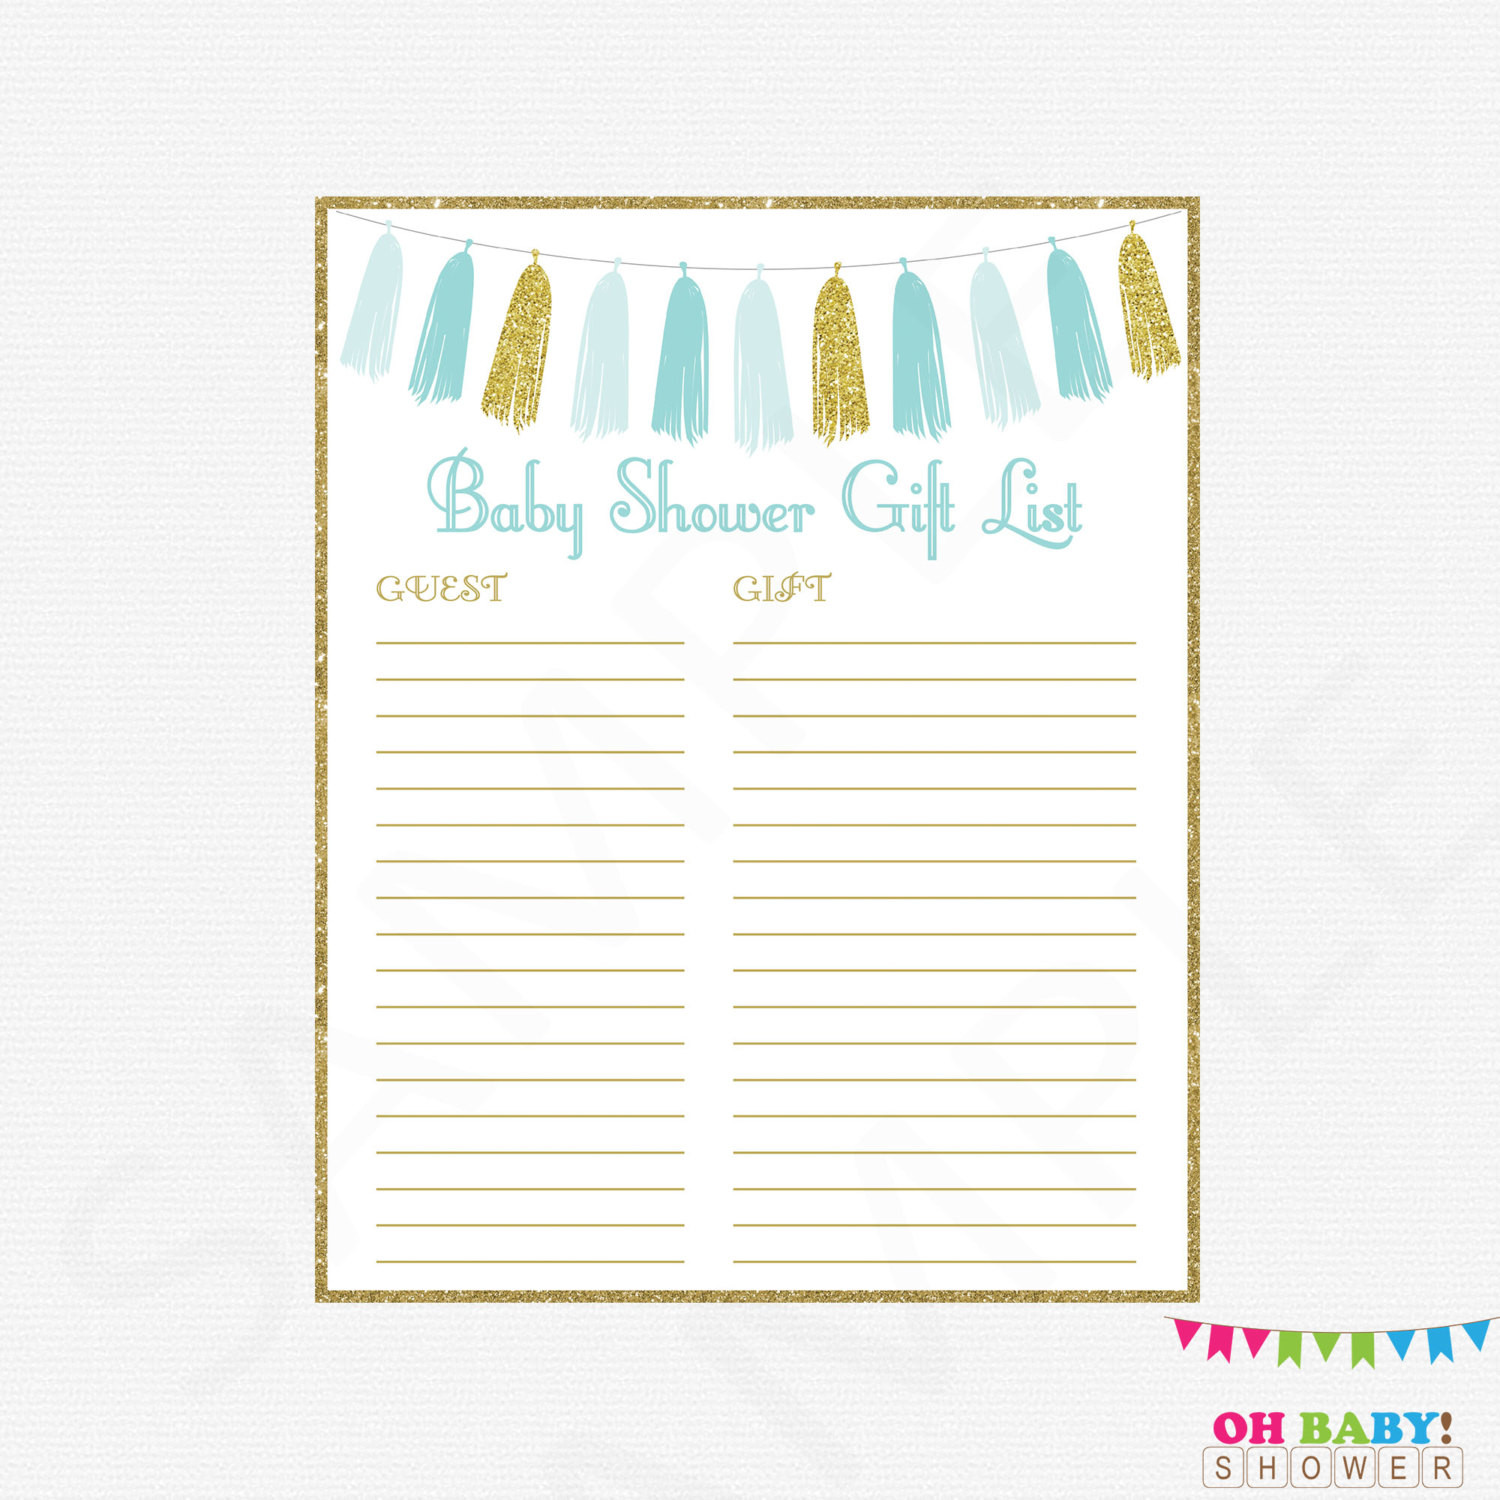 Baby Shower Gift List Printable
 Printable Gift List Boy Baby Shower Guest Sign in Sheet